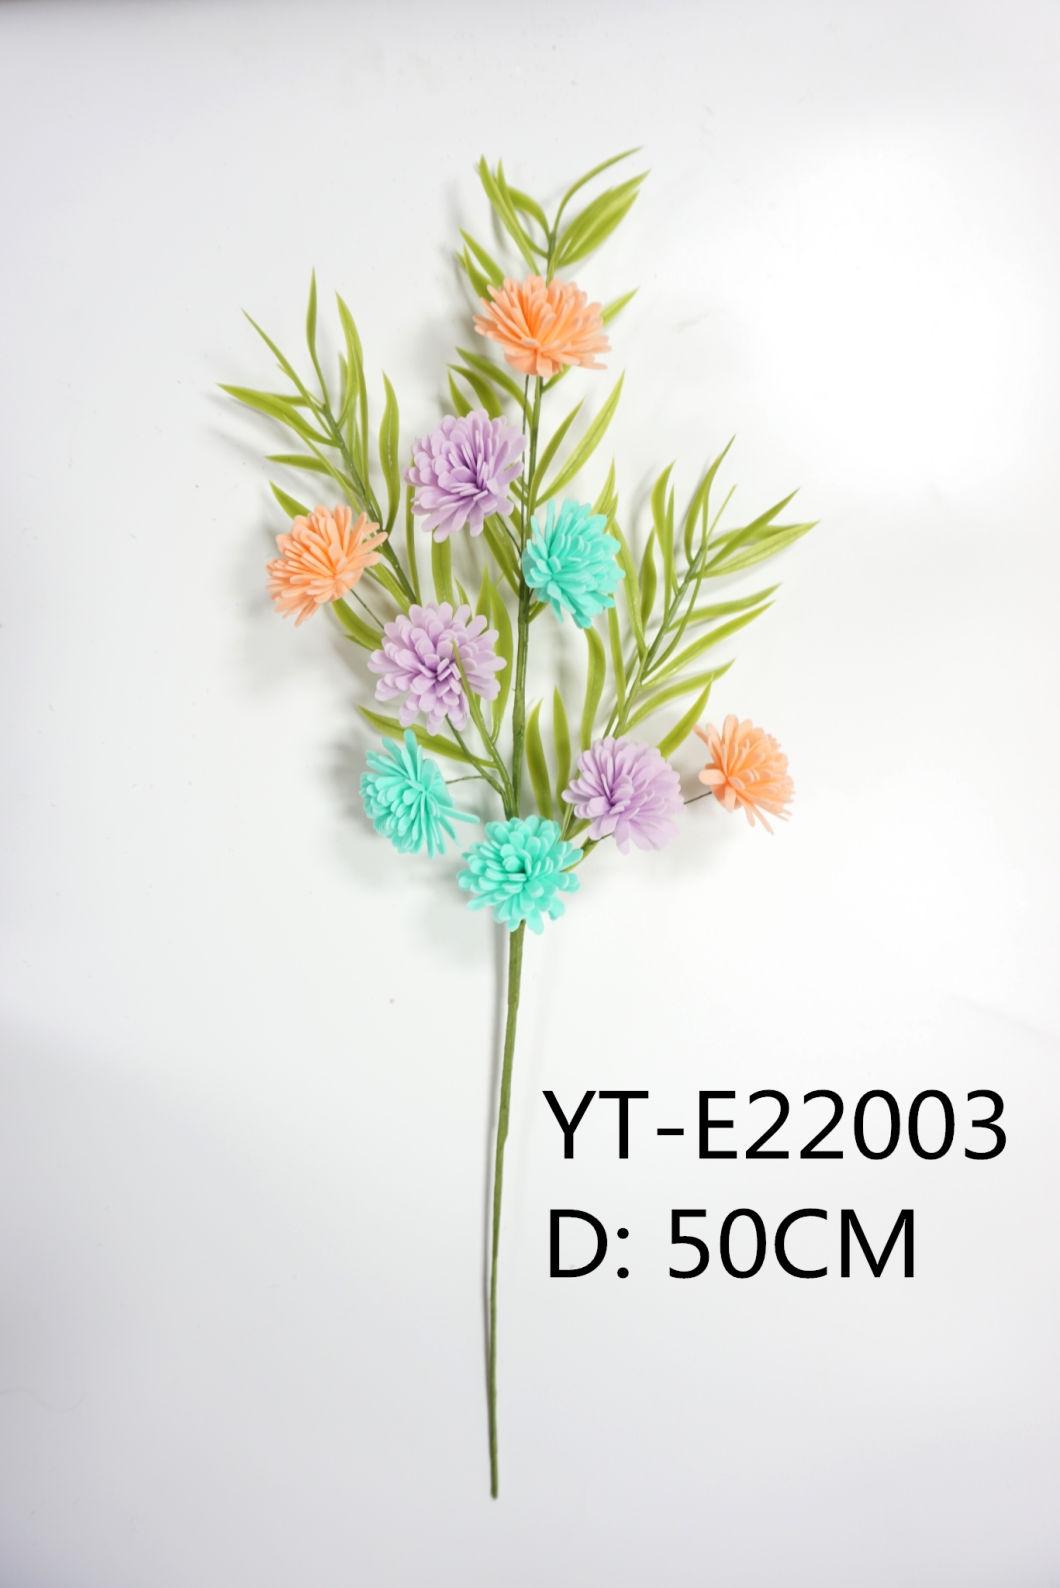 BSCI Easter New Styles Floral Spring Picks for Wreath Decoration